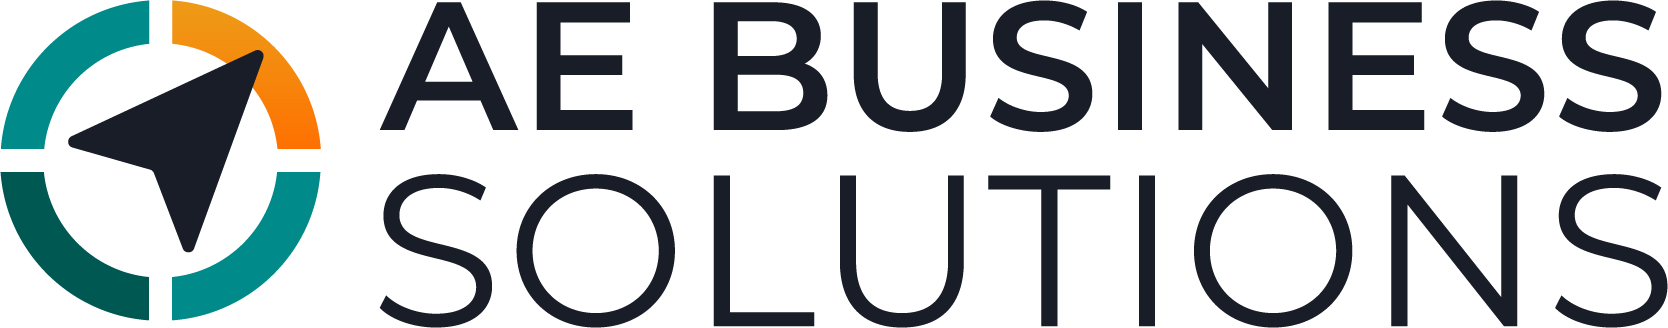 AE Business Solutions Company Logo